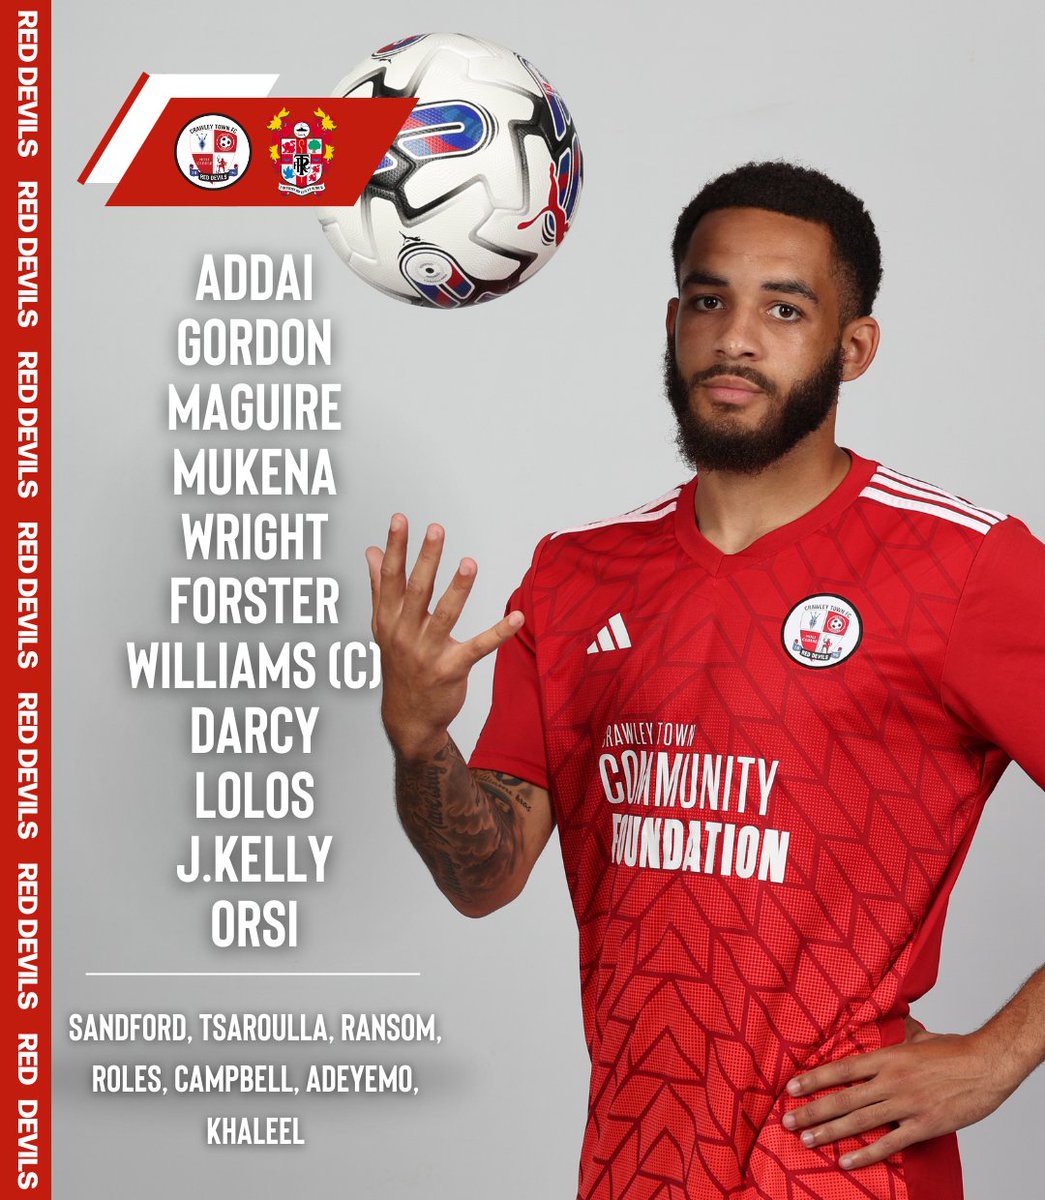 📰 TEAM NEWS Jay Williams has returned from international duty early and captains an unchanged Crawley team this afternoon! #TownTeamTogether🔴